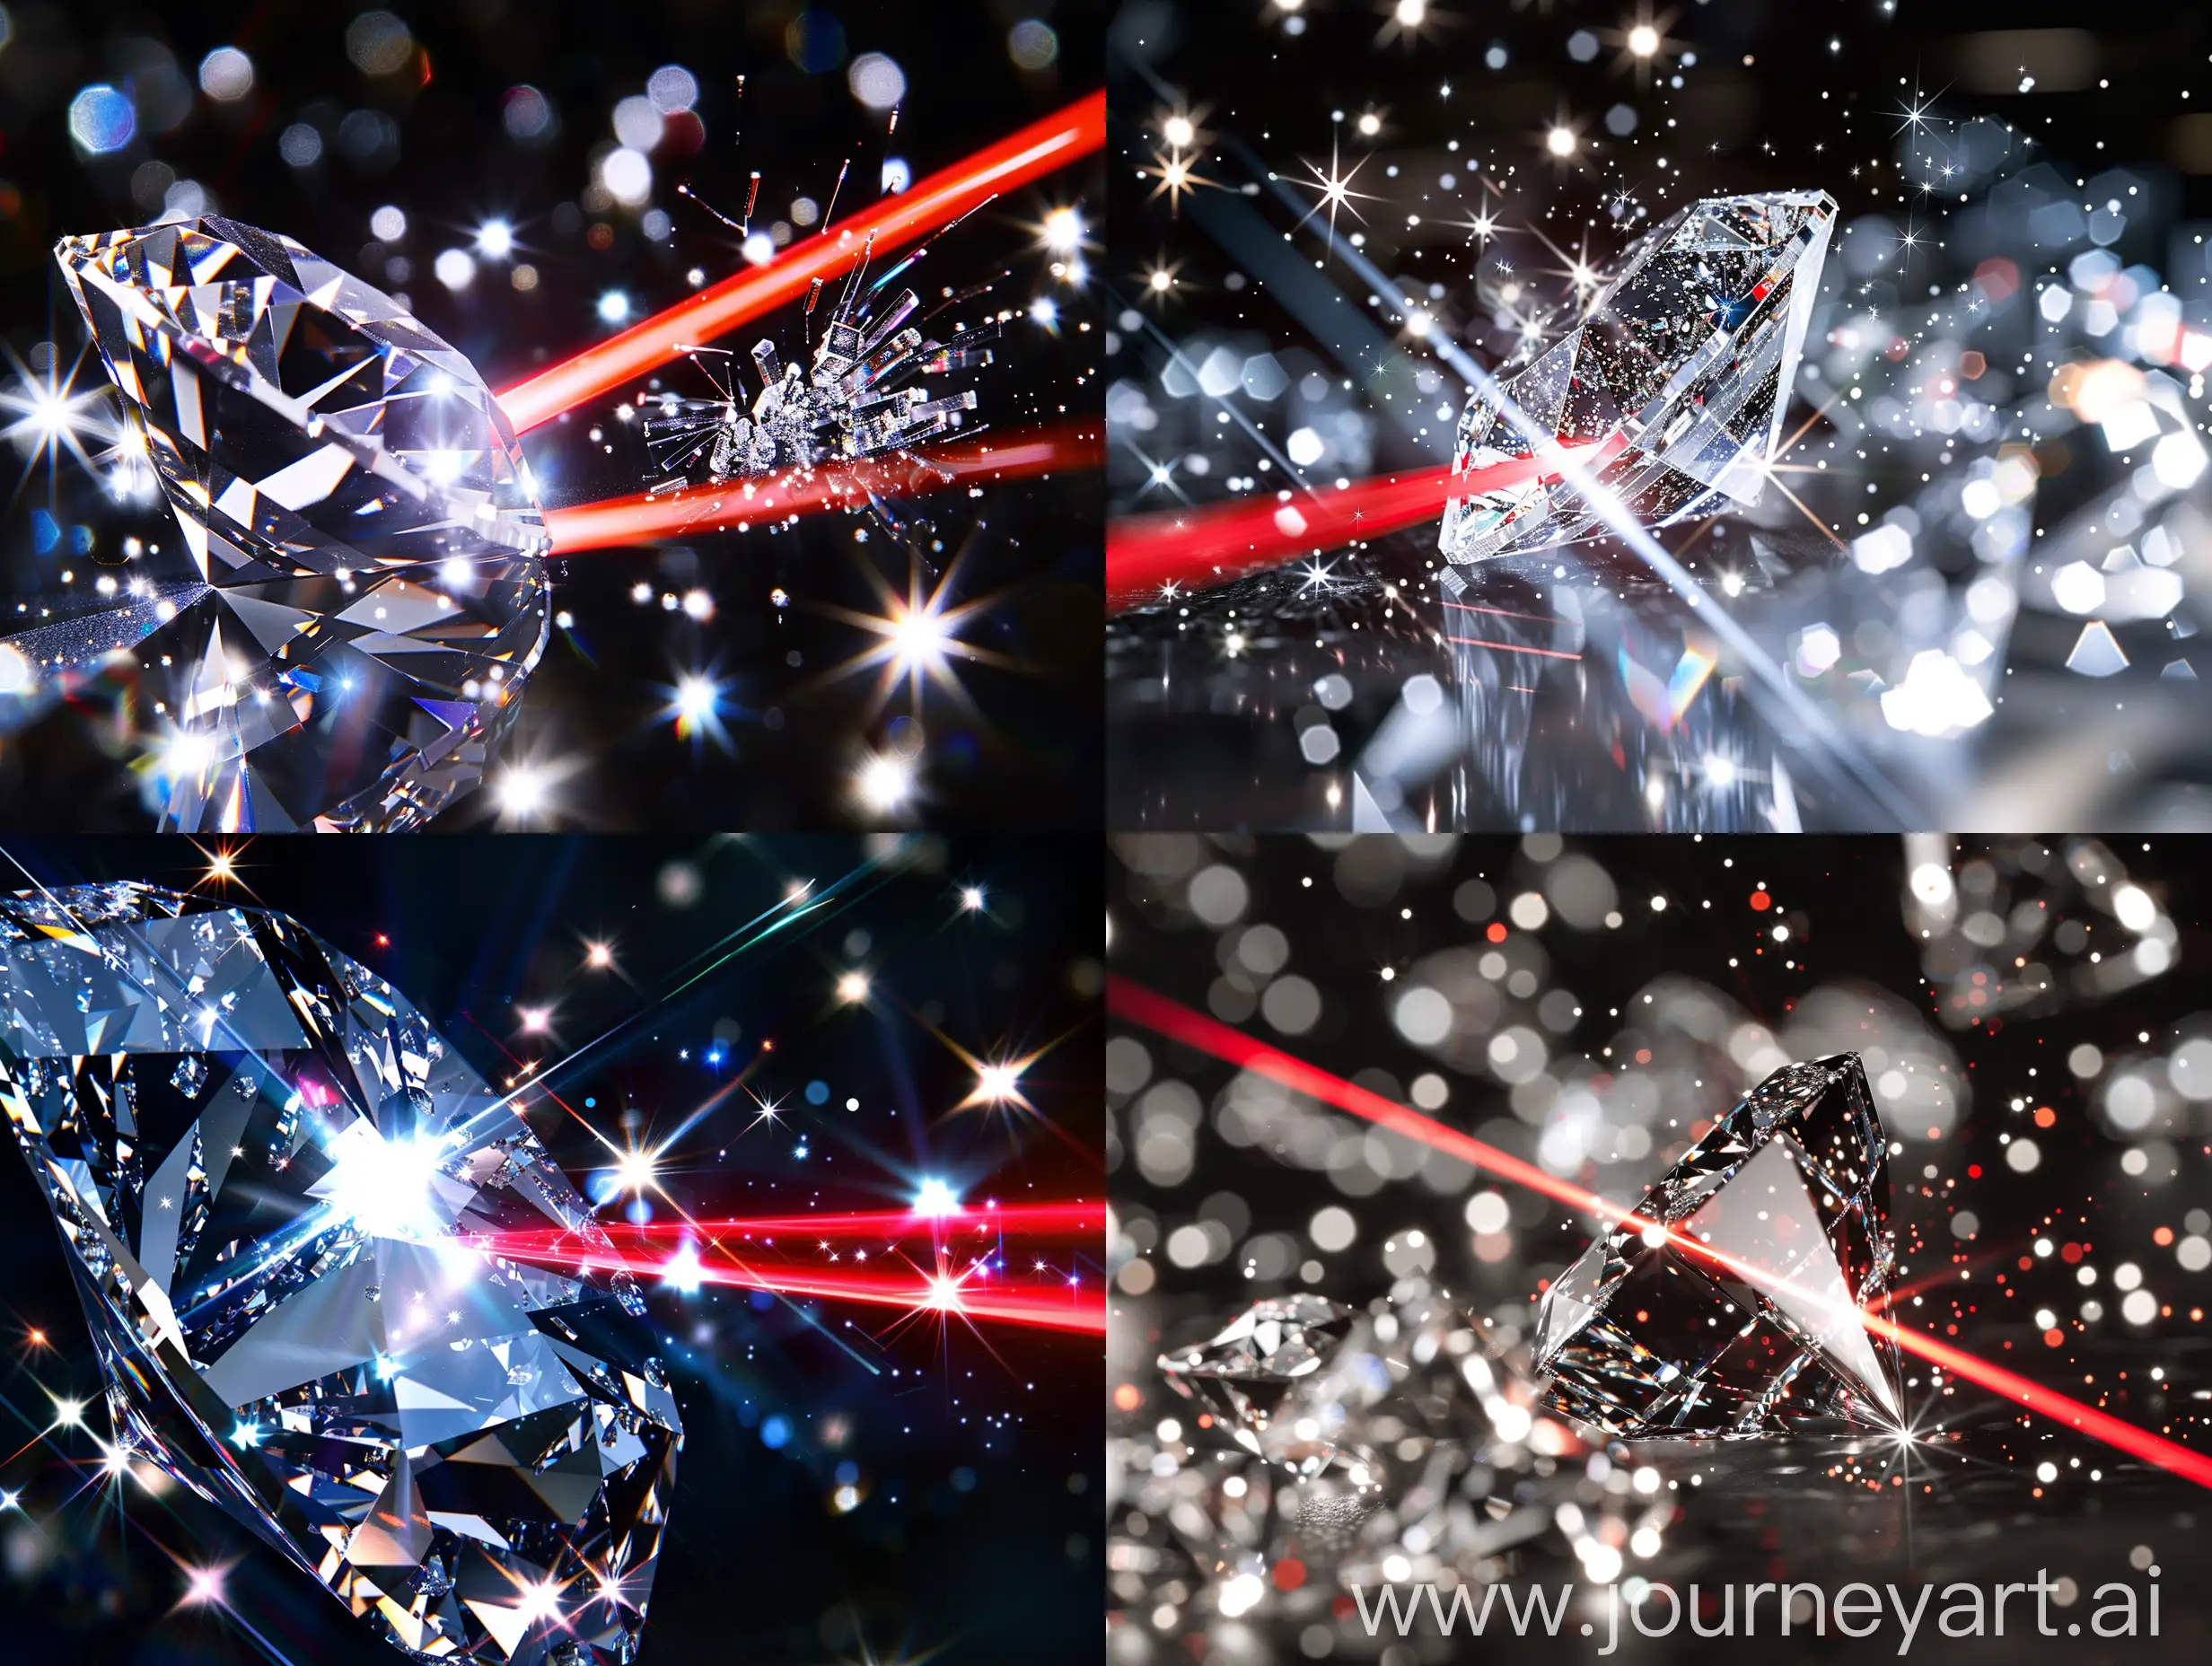 a diamond with a red beam coming out of it, refracted sparkles, crystal refraction of light, refractive crystal, diamond prisms, laser weapons, refracted line and sparkles, laser light *, refracted lines and sparkles, crystalized time warps, profile picture, swarovski, made of crystalized synapse, laser beam, crystals enlight the scene
